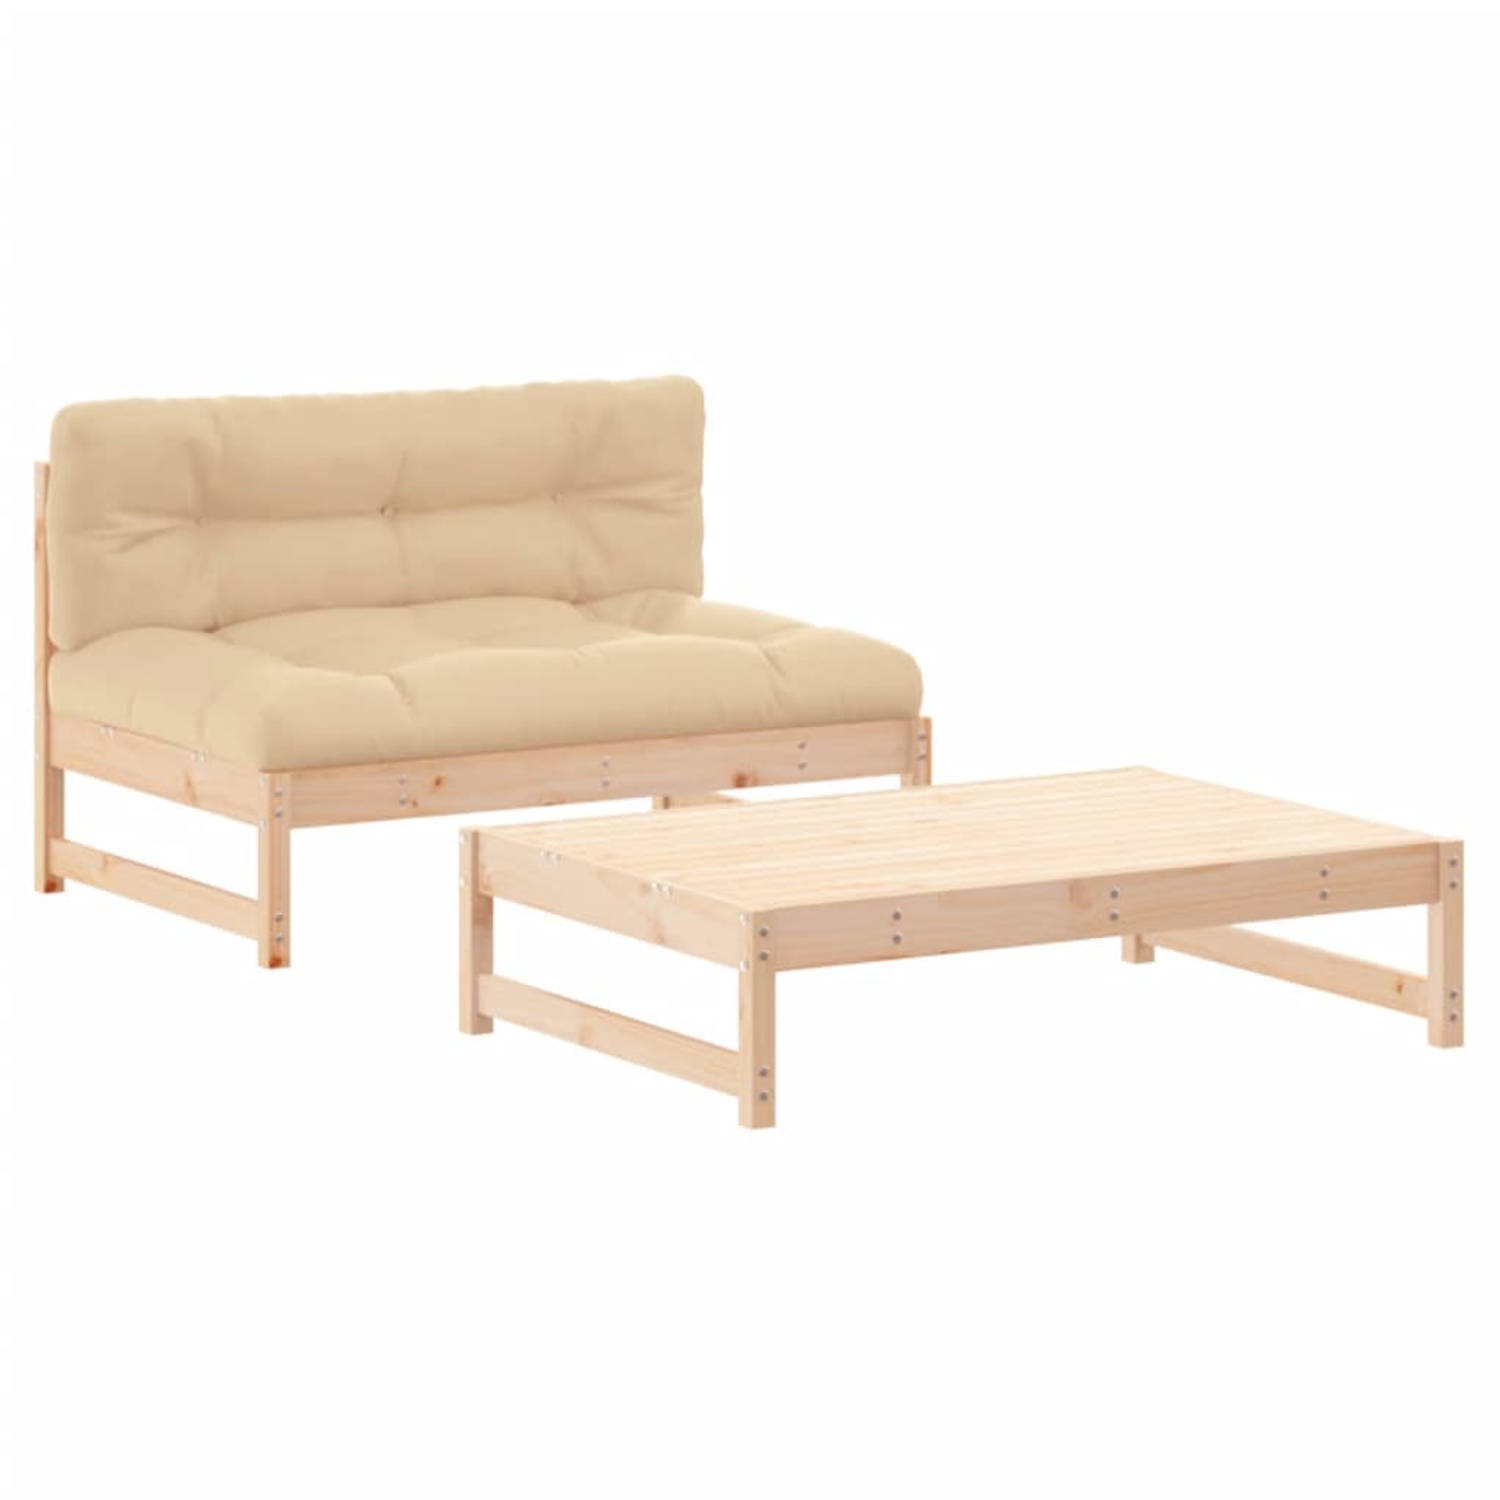 The Living Store - Loungeset - Hout - 120 x 84 x 70 cm - Massief grenenhout